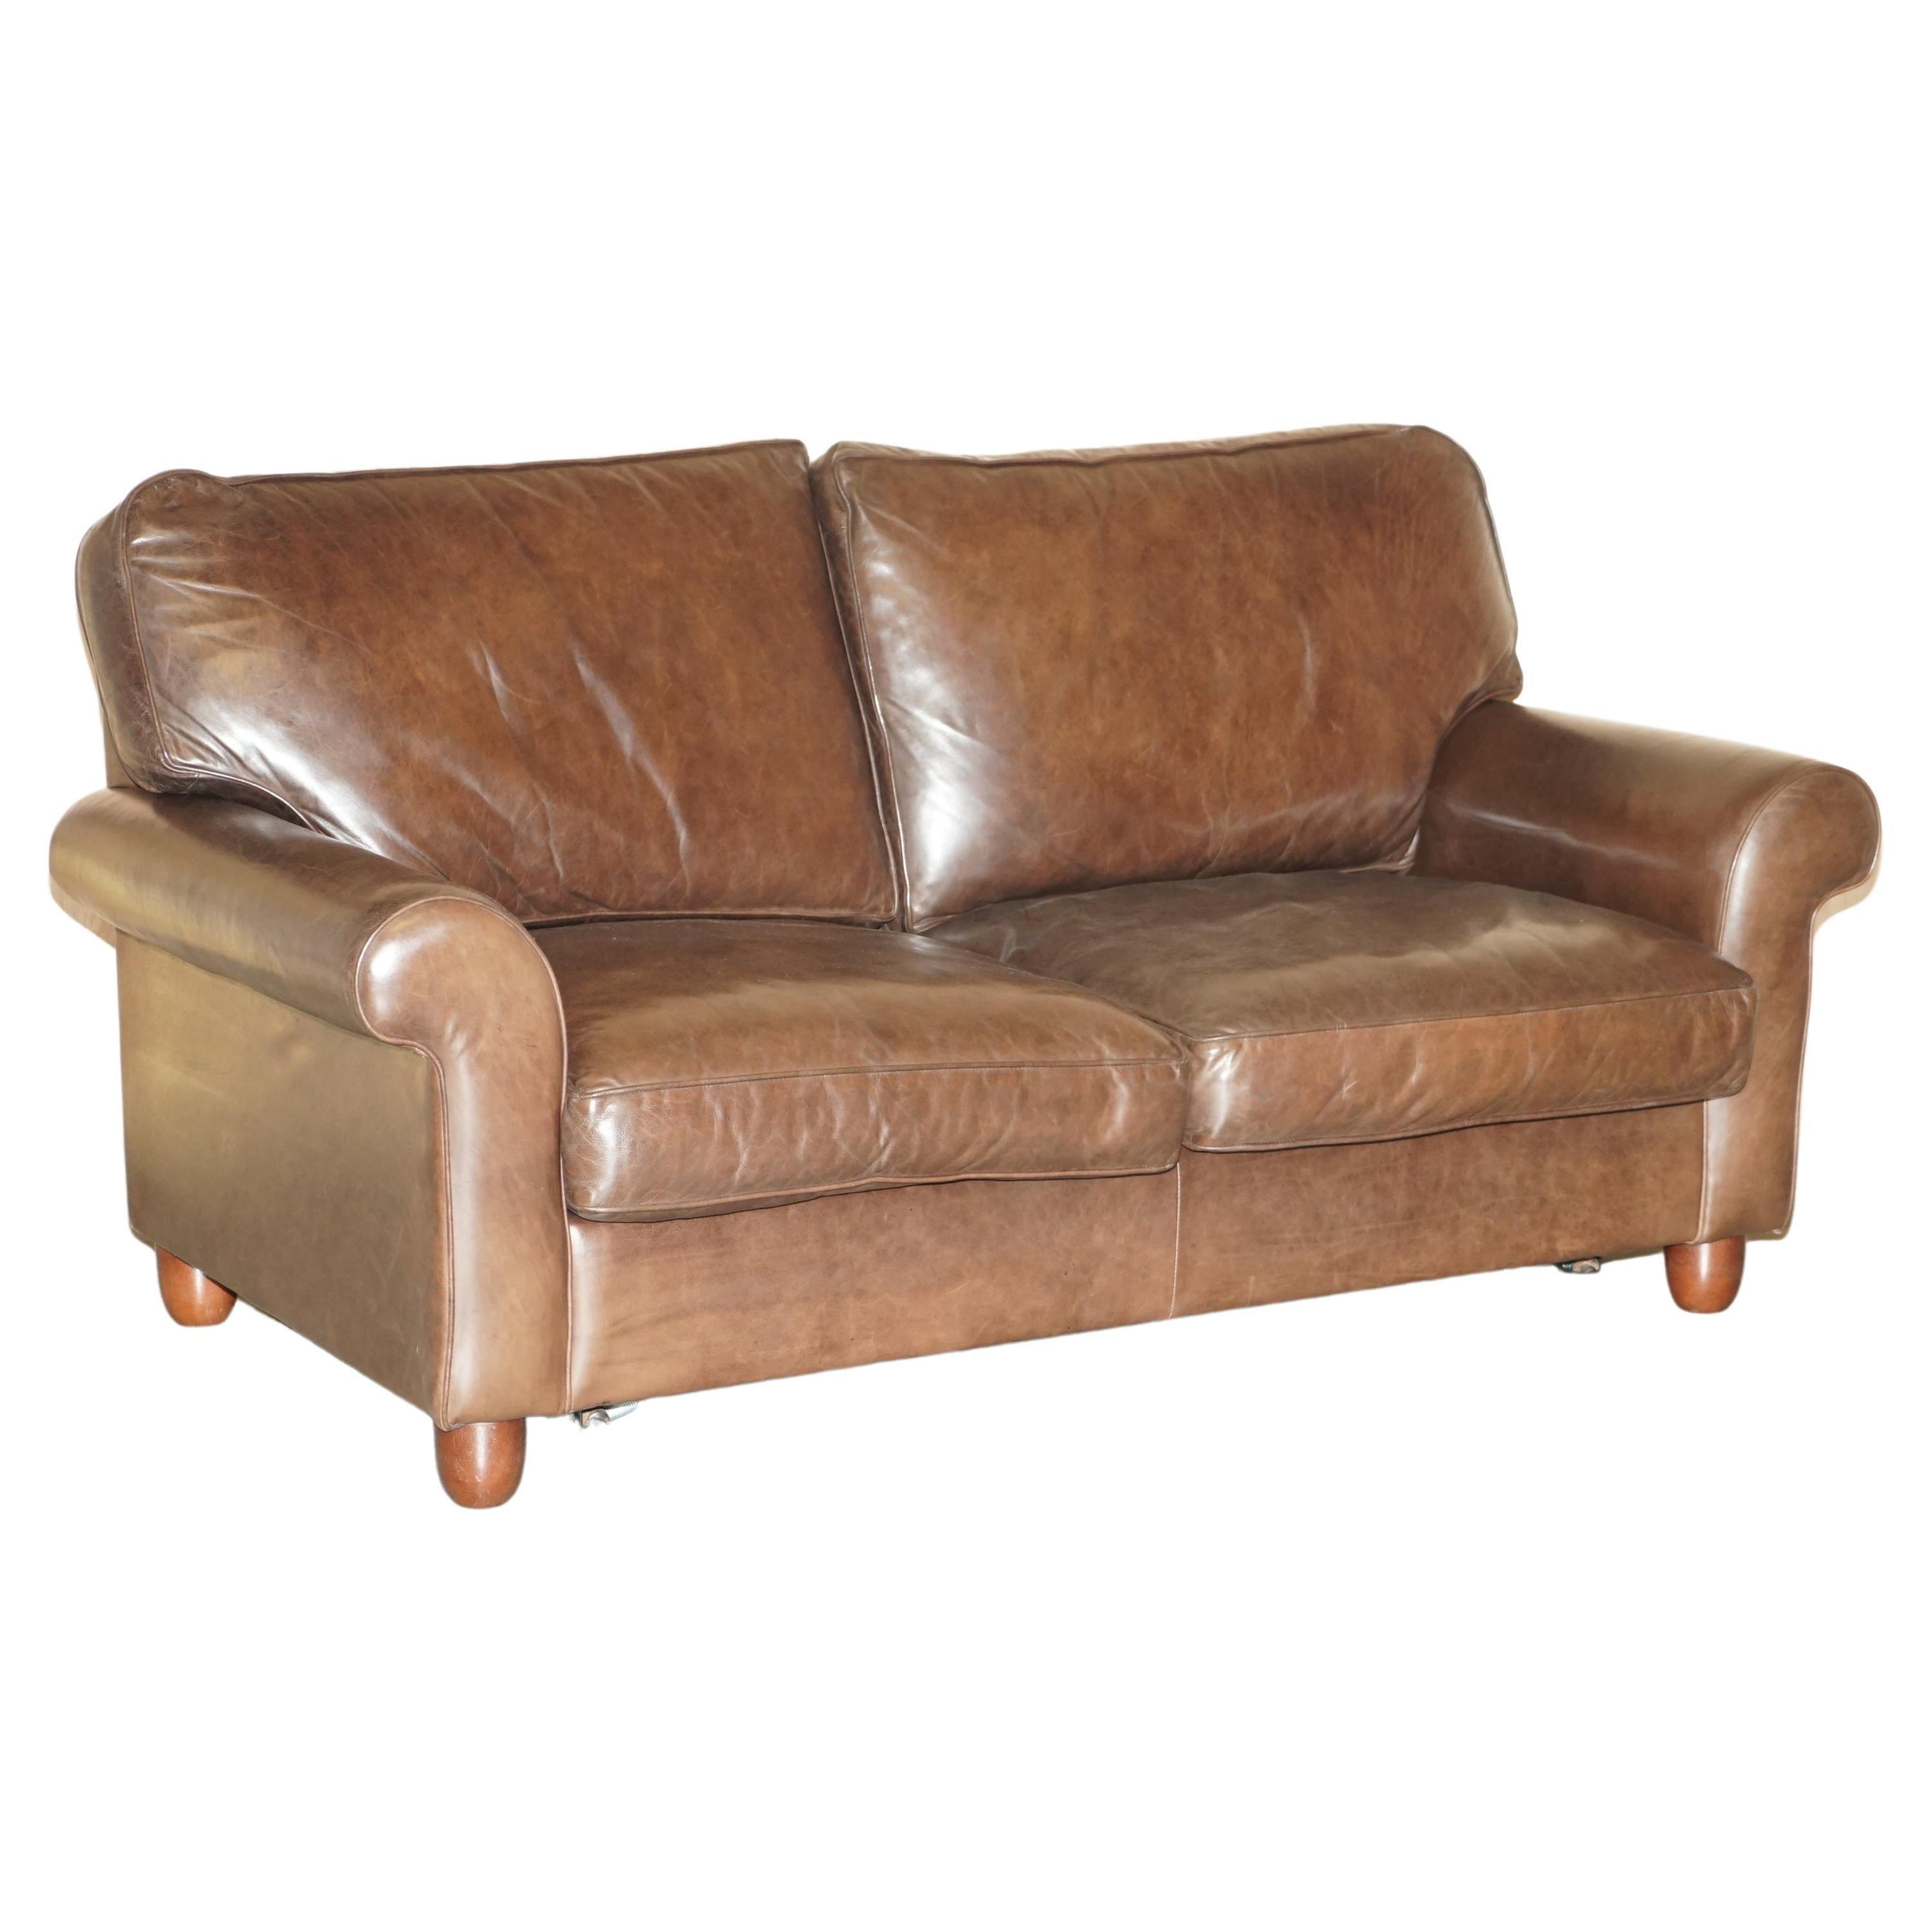 LOVELY HERITAGE BROWN LEATHER LAURA ASHLEY MORTIMER SOFABED IN SEHR GUTEM ZUSTAND